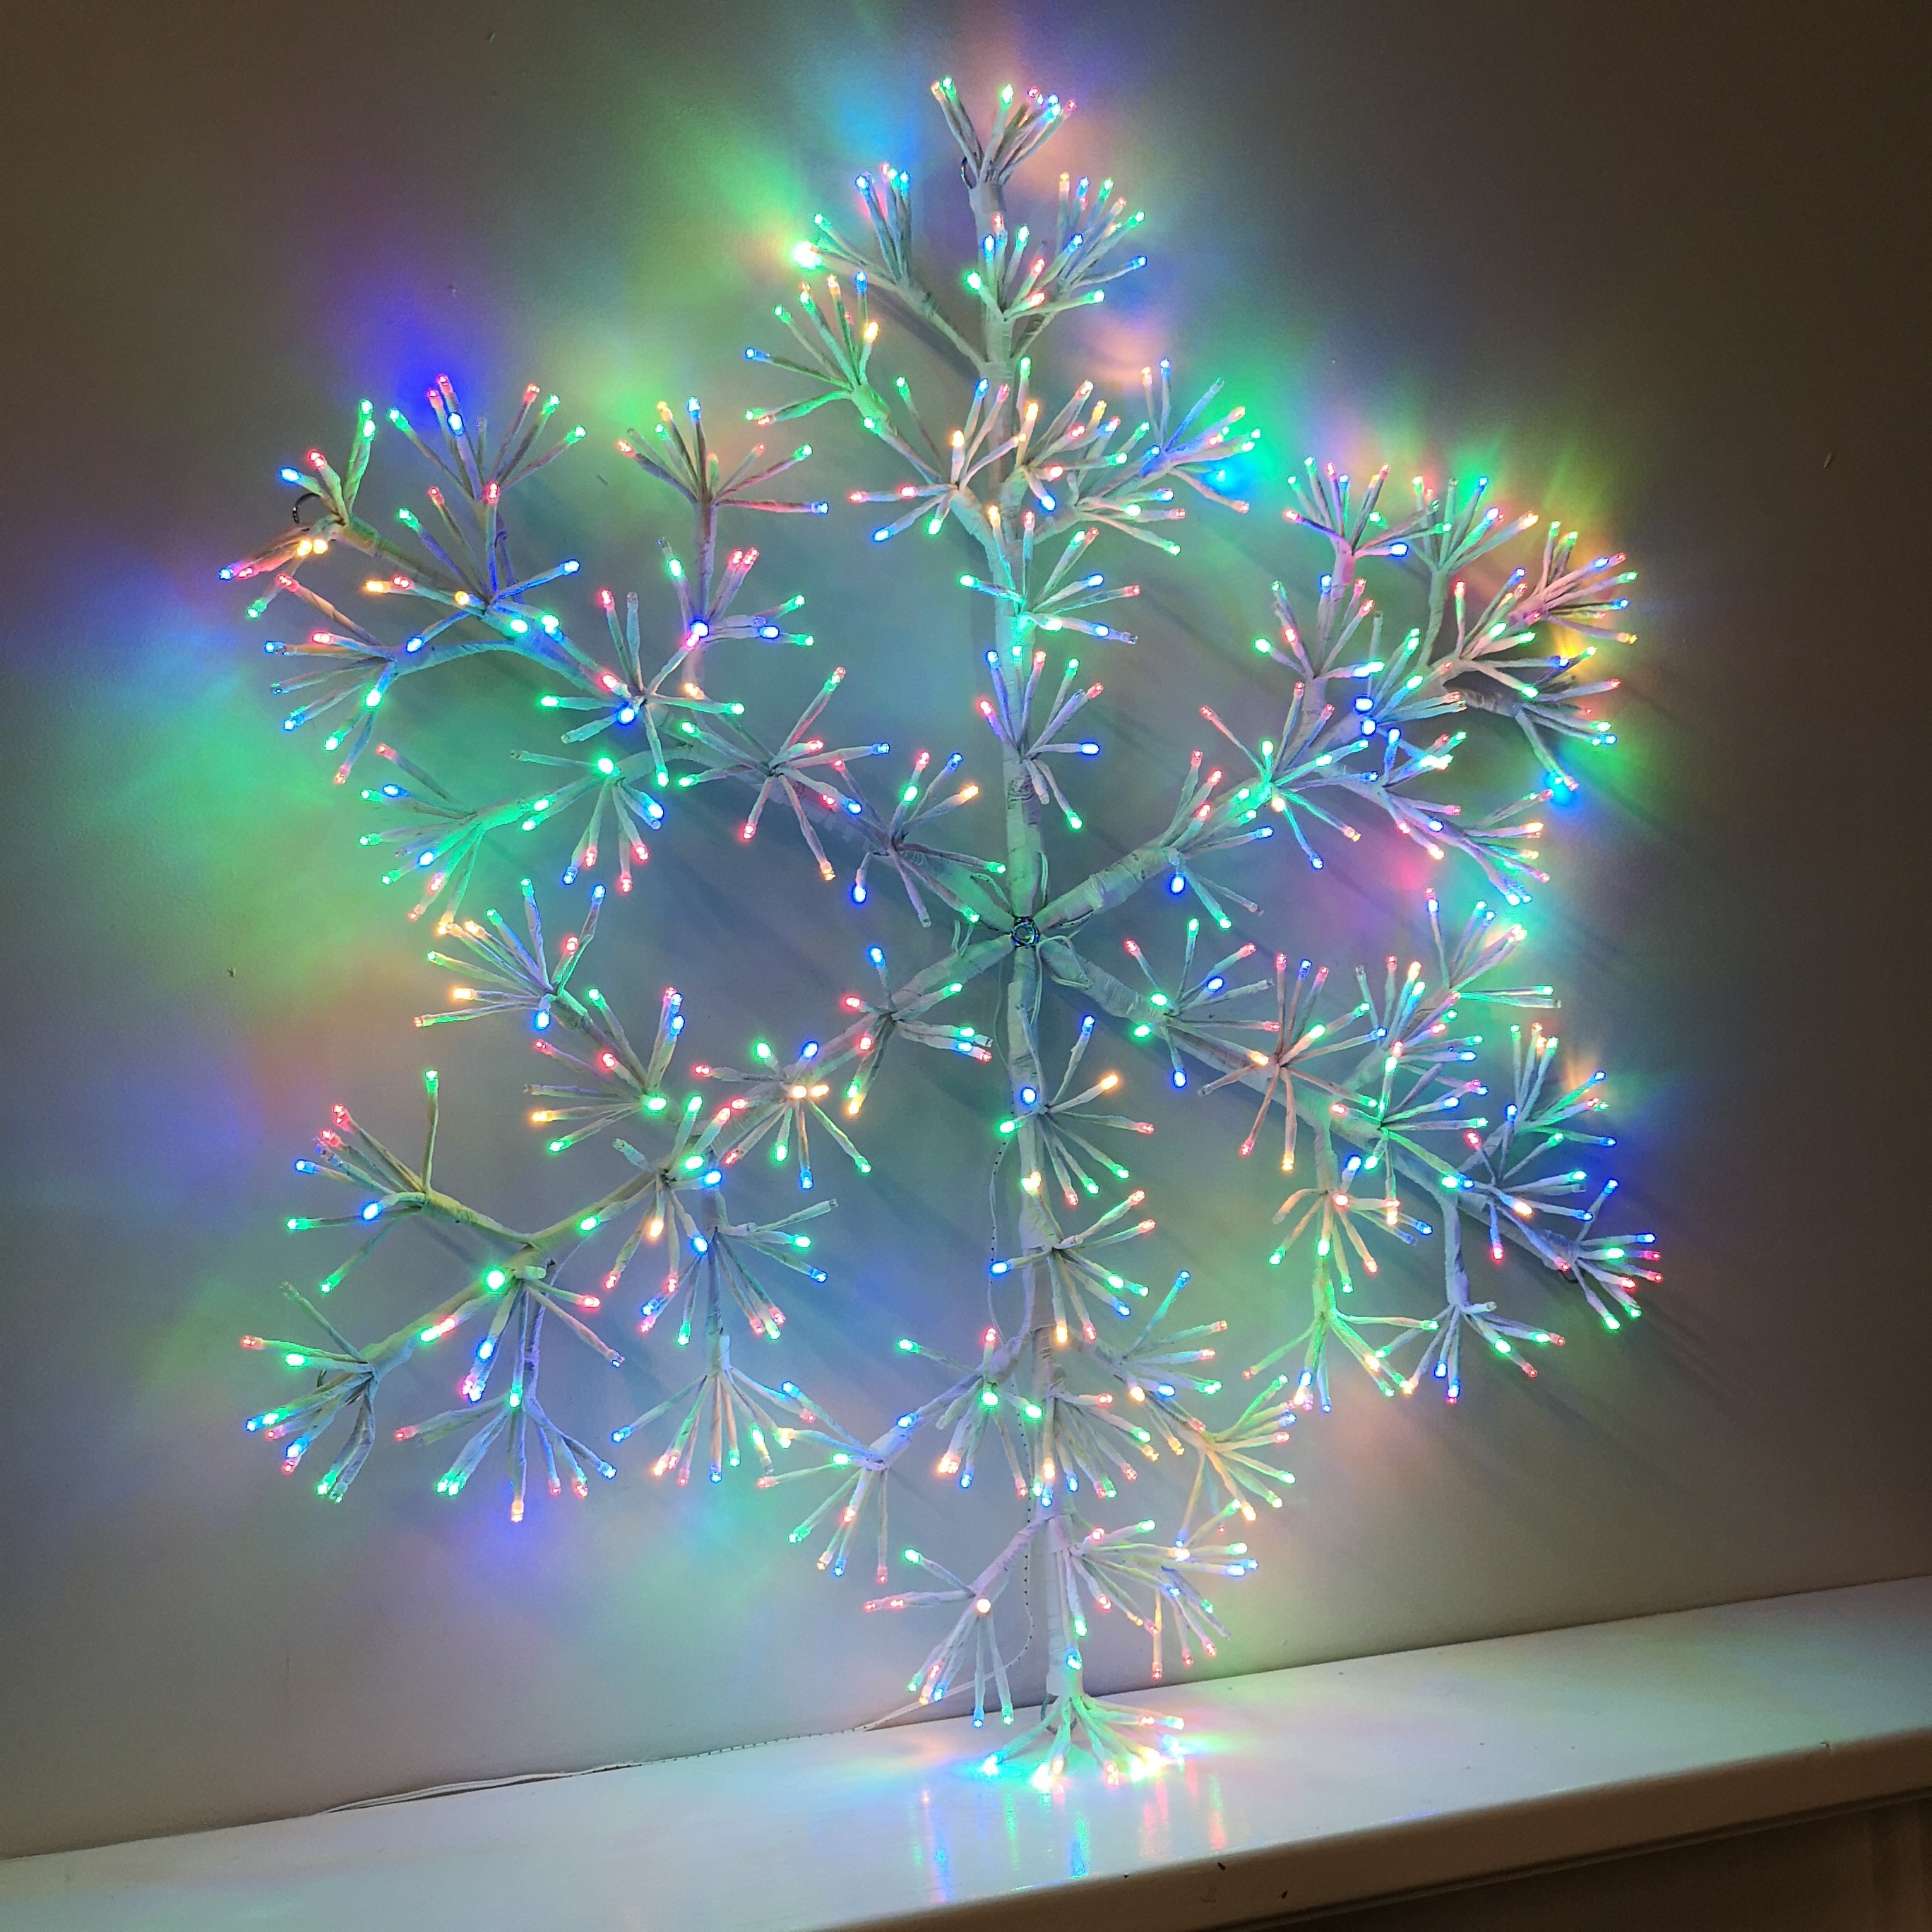 90cm Premier White Starburst Snowflake Christmas Decoration with Twinkling LEDs in Multicoloured